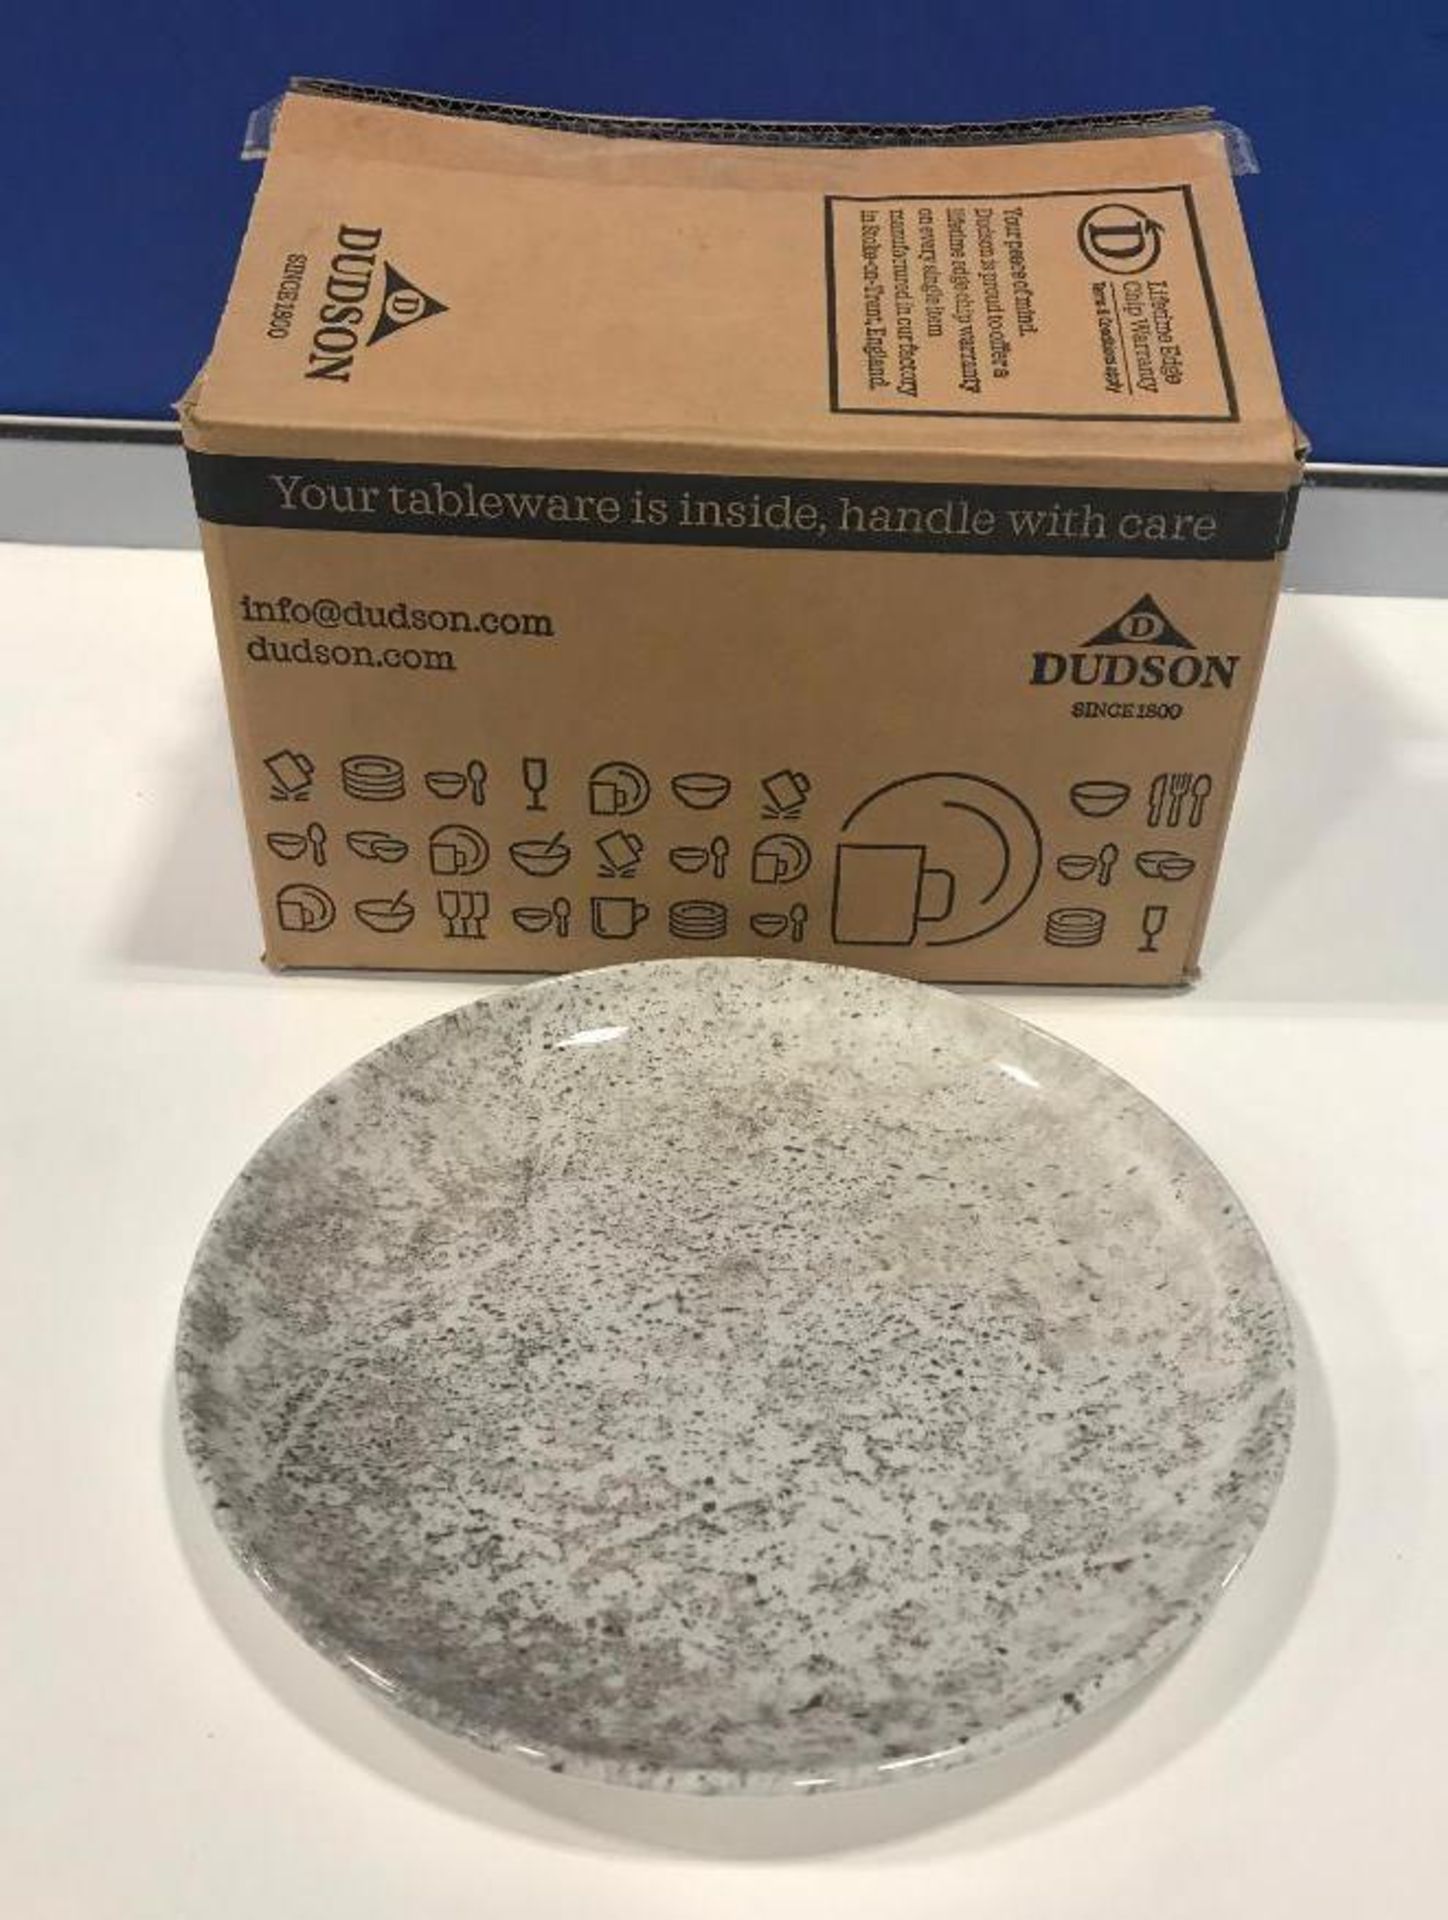 DUDSON CONCRETE PLATE 8 7/8" - 12/CASE, MADE IN ENGLAND